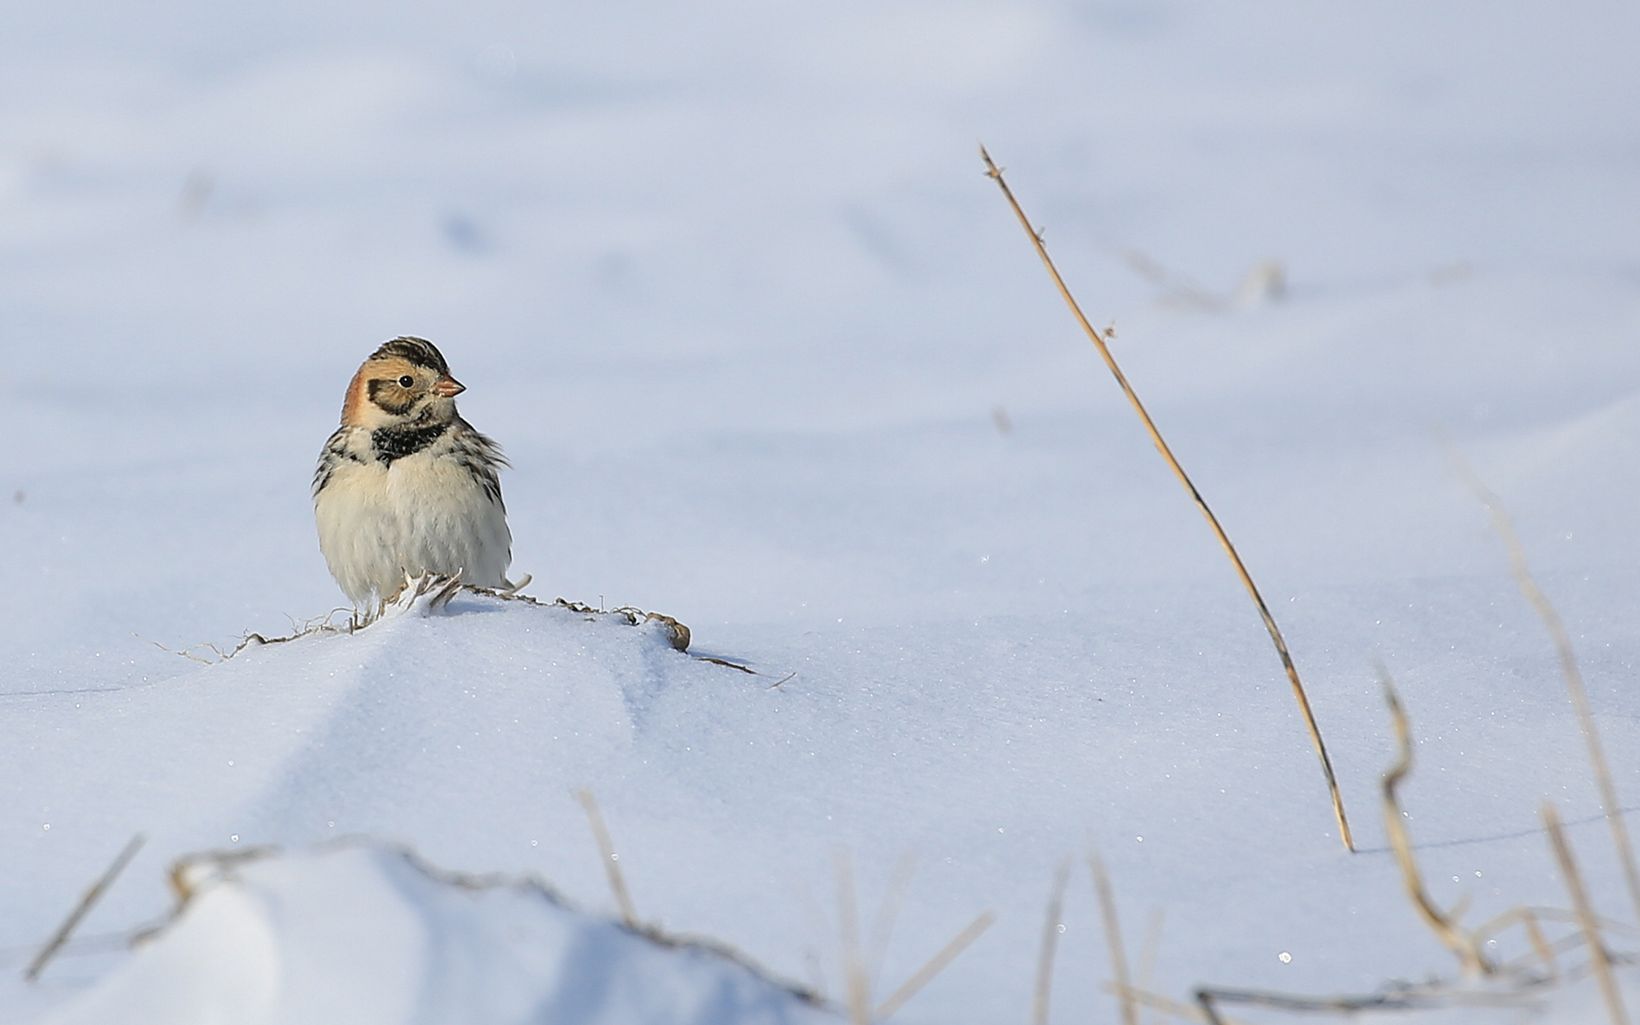 A small bird rests in a snowy landscape.